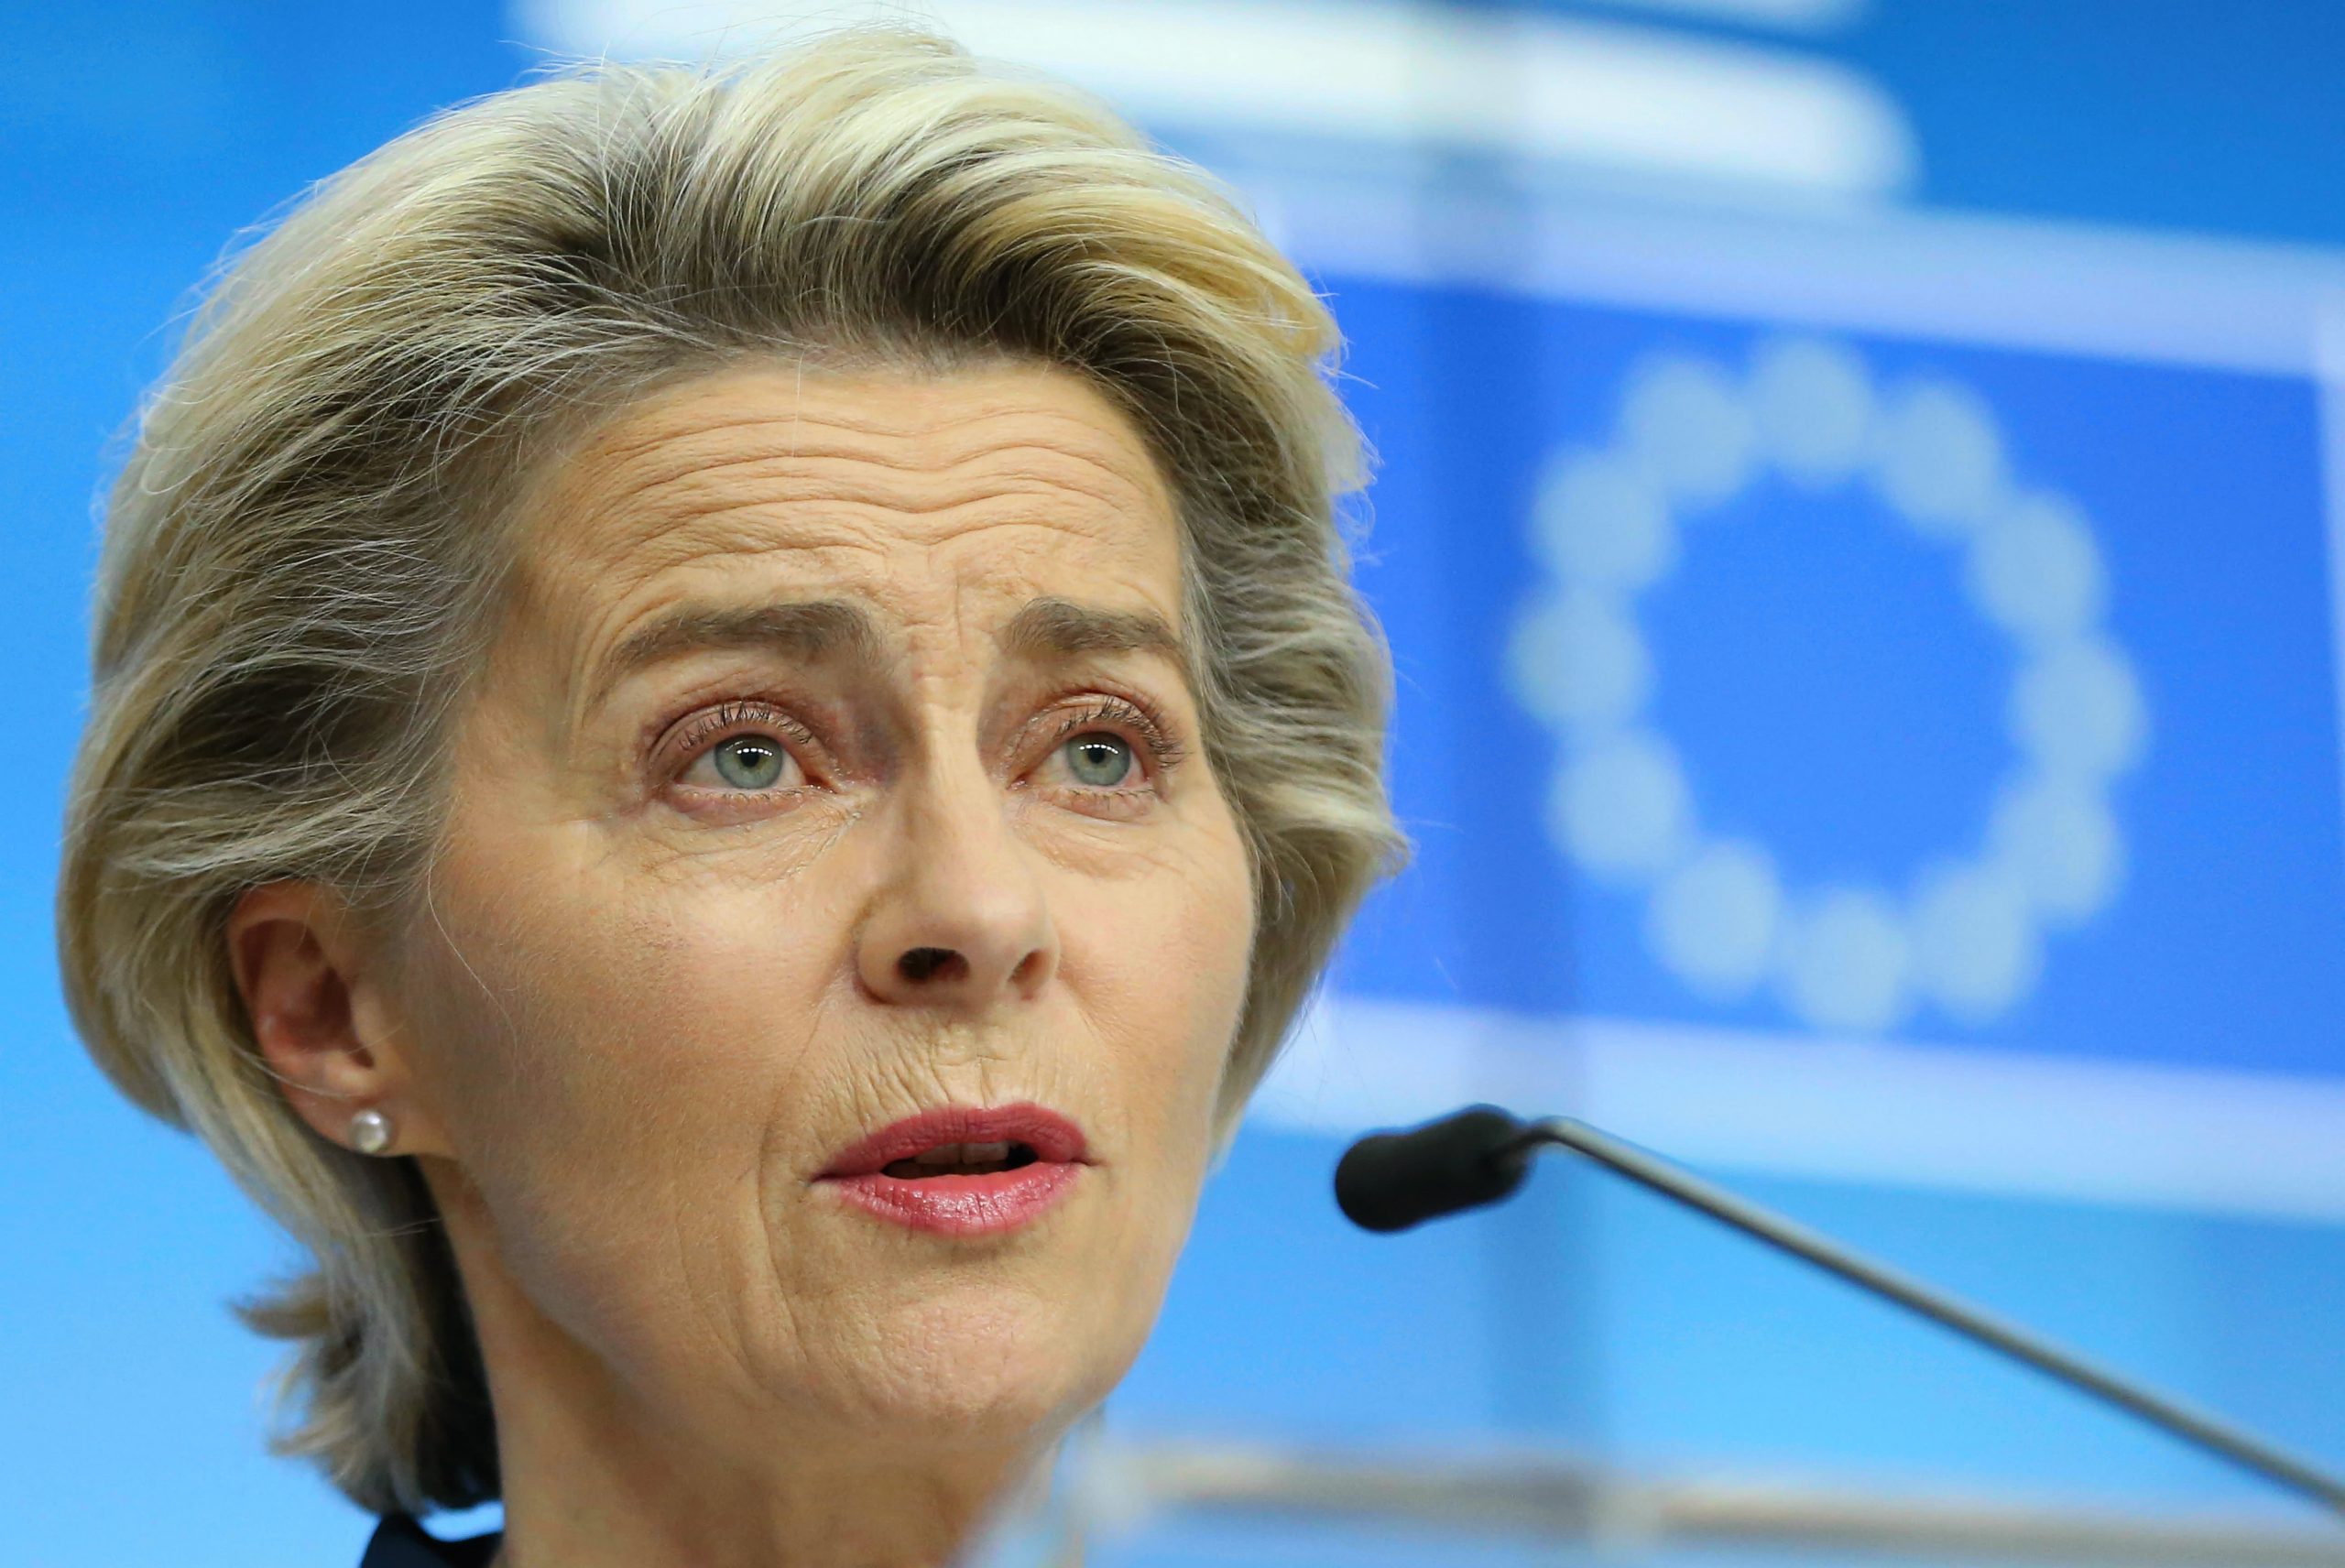 The European Union's von der Leyen is urging a gradual lifting of lockdowns related to the Coronavirus

